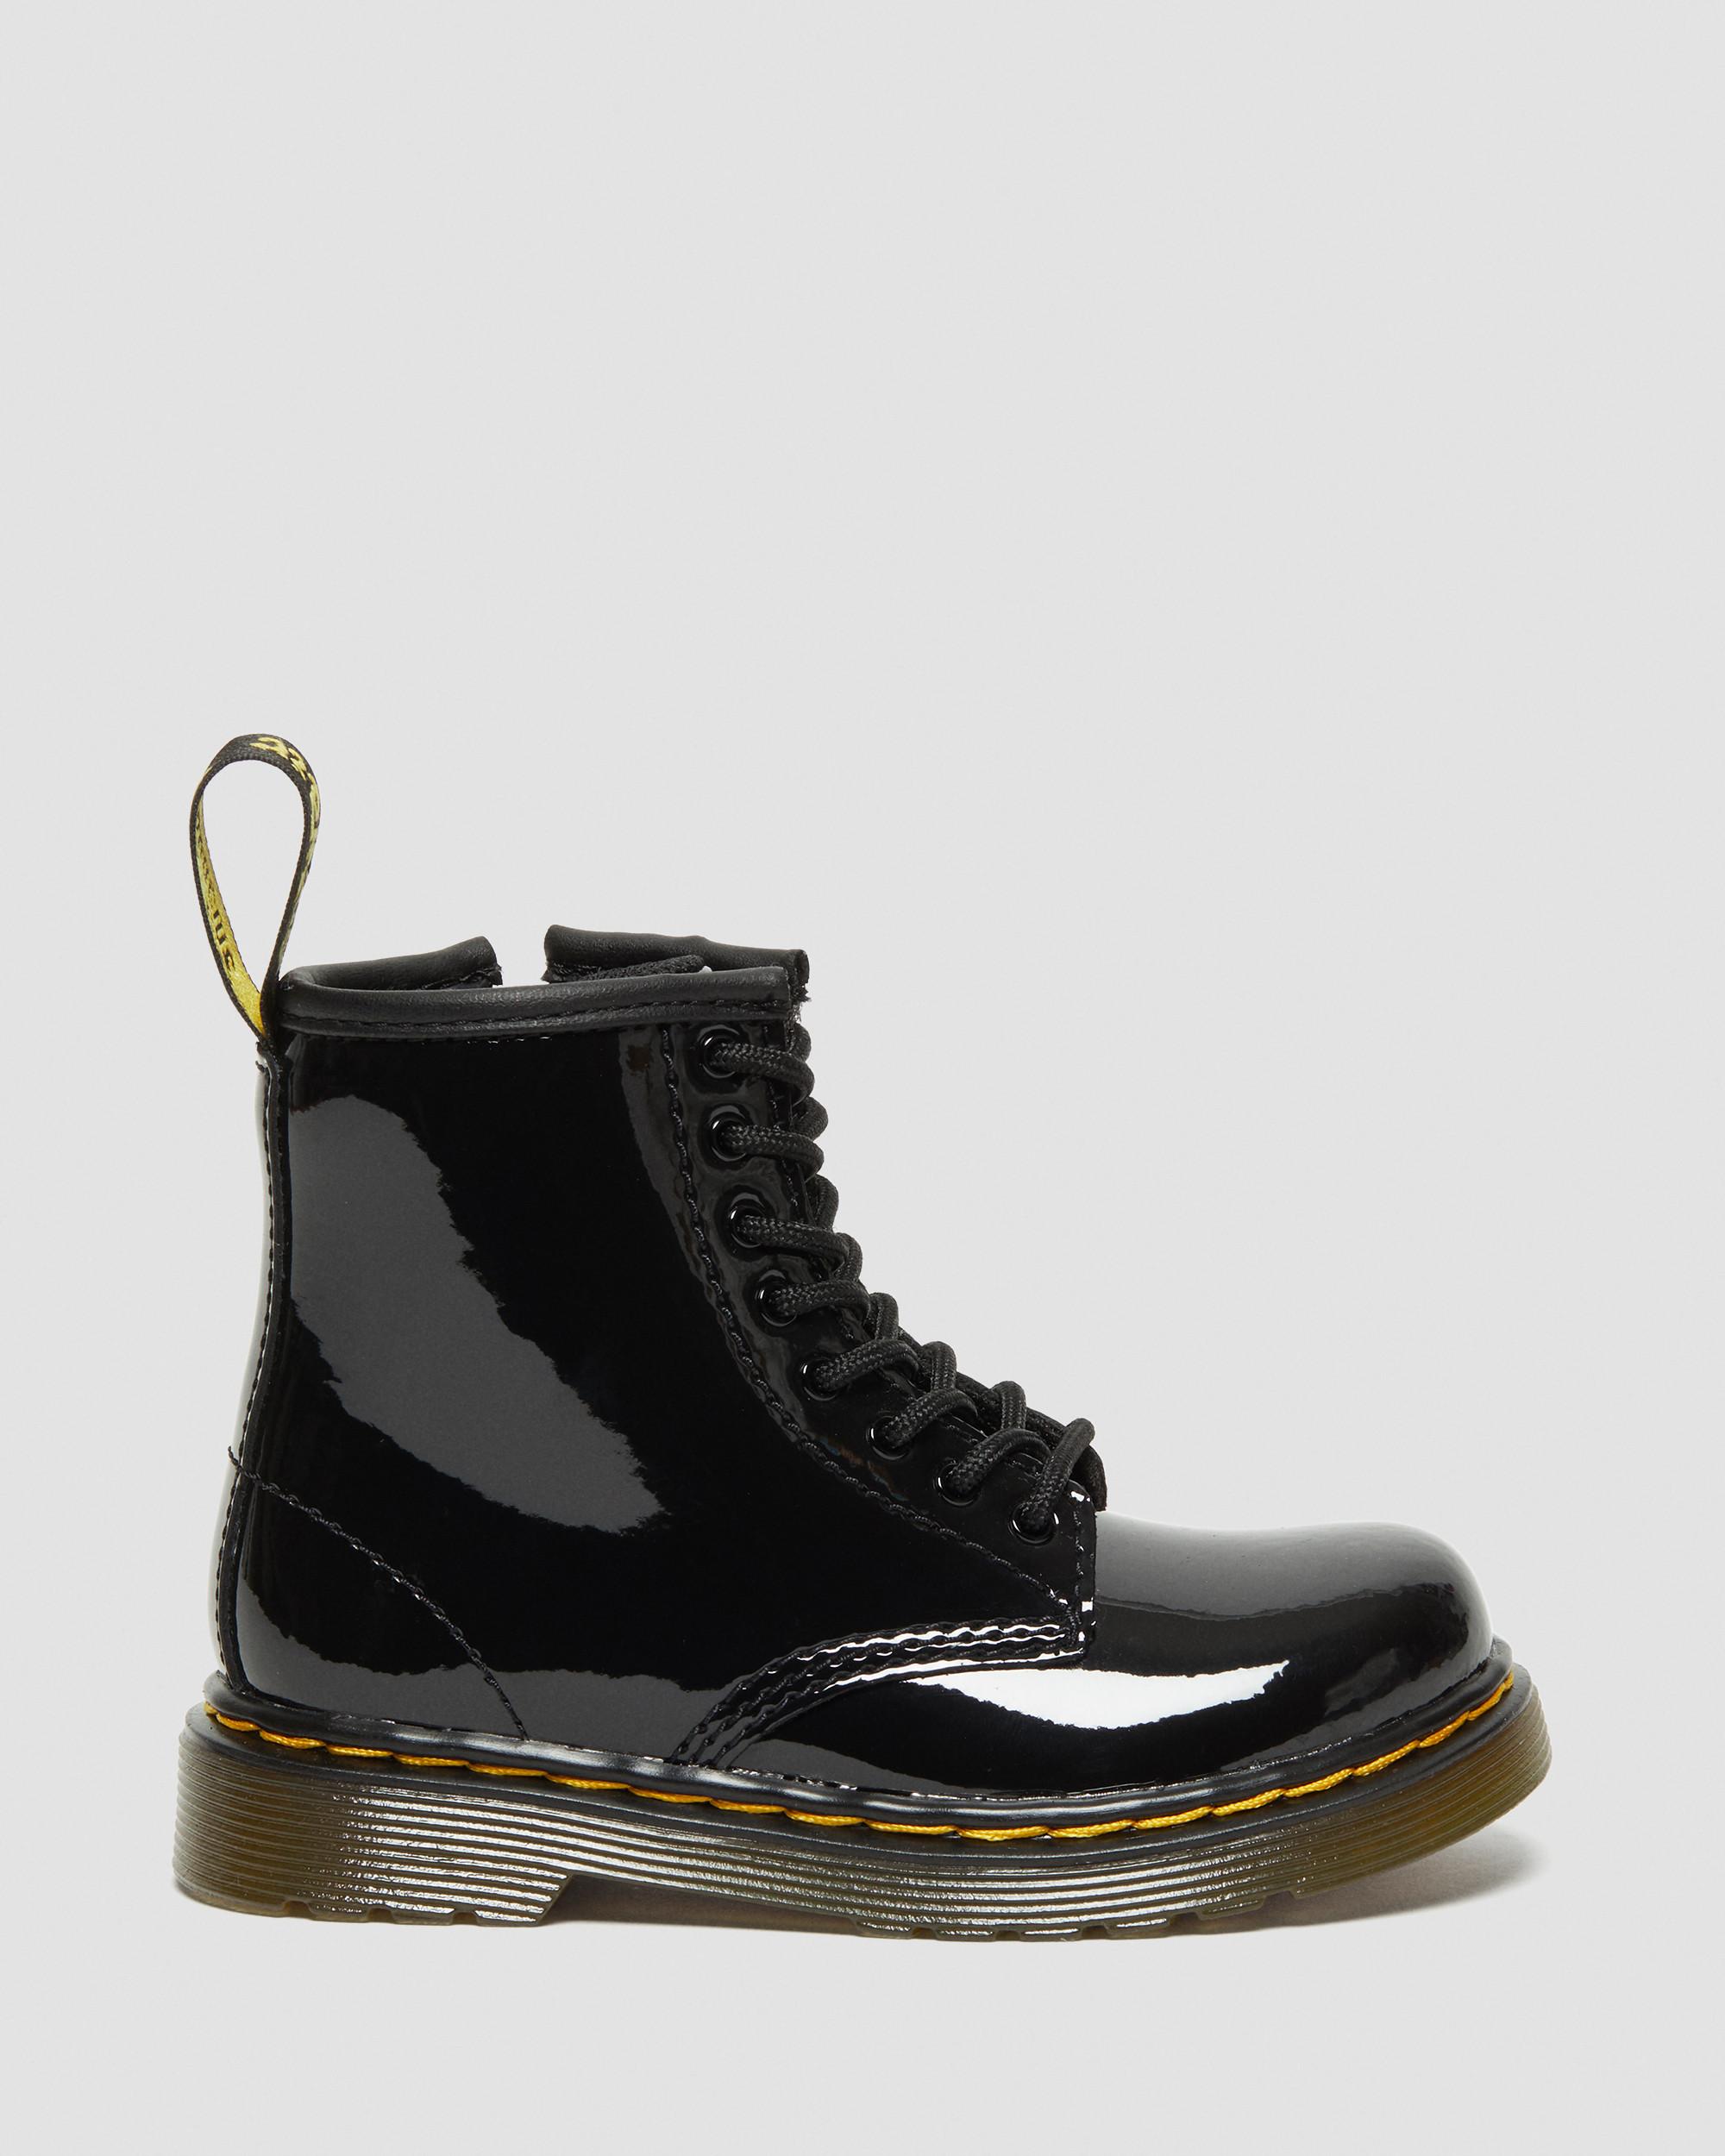 Toddler 1460 Patent Leather Lace Up Boots in Black